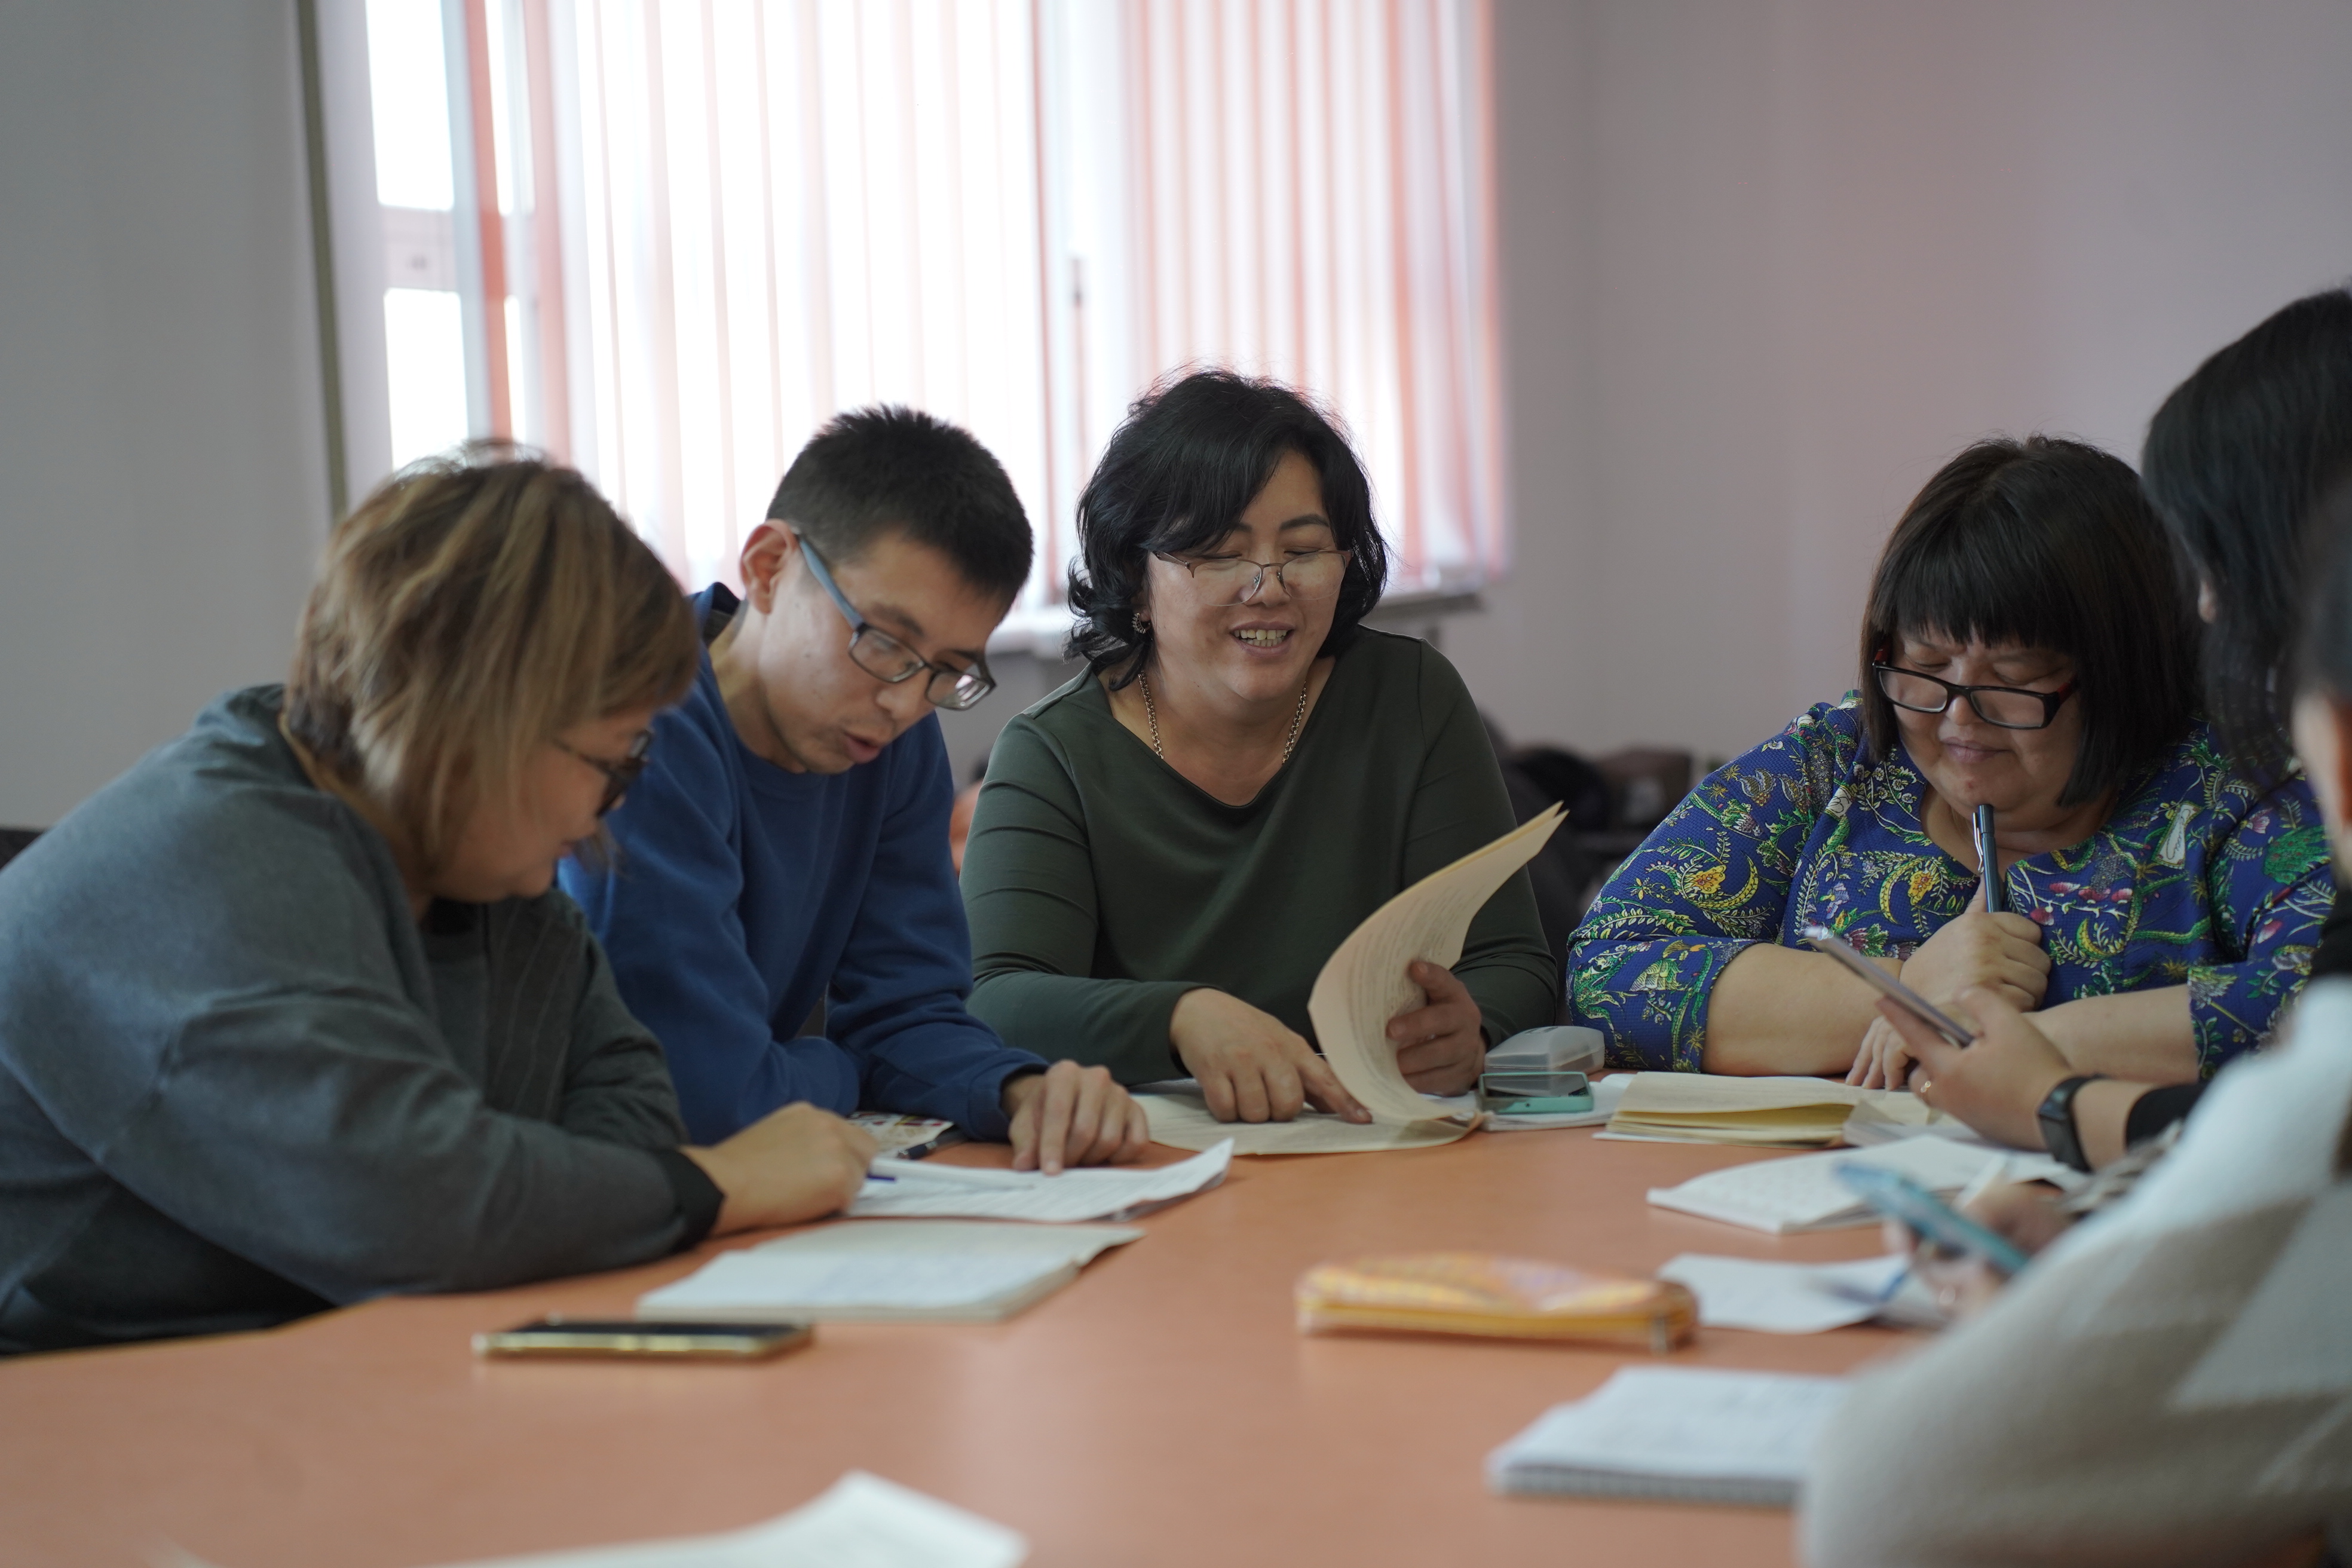 THERE ARE FREE ENGLISH LANGUAGE COURSES FOR THE TEACHING STAFF